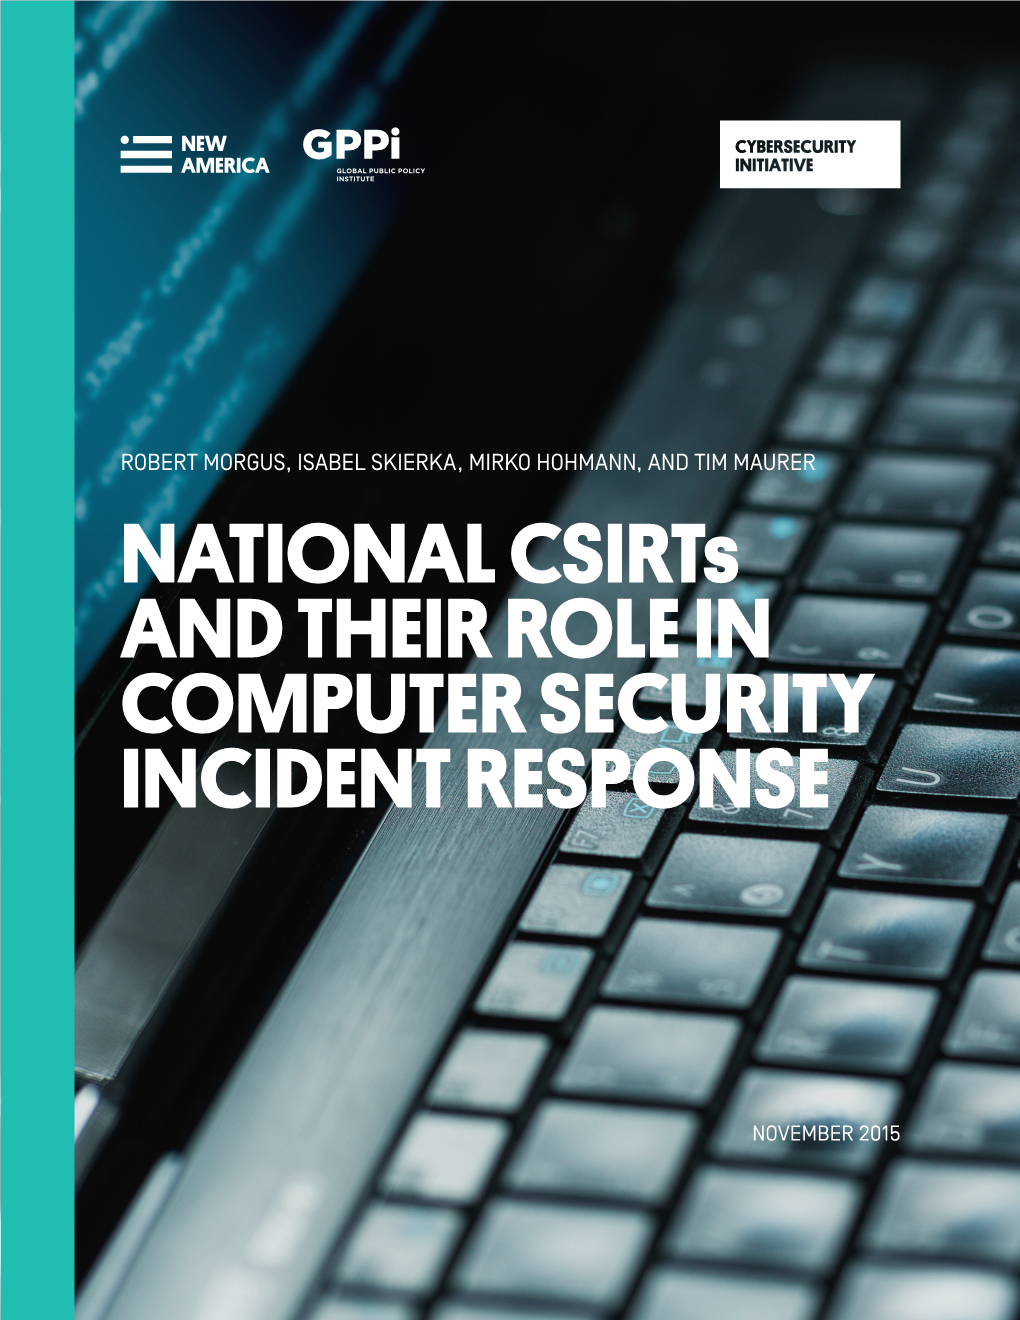 NATIONAL Csirts and THEIR ROLE in COMPUTER SECURITY INCIDENT RESPONSE